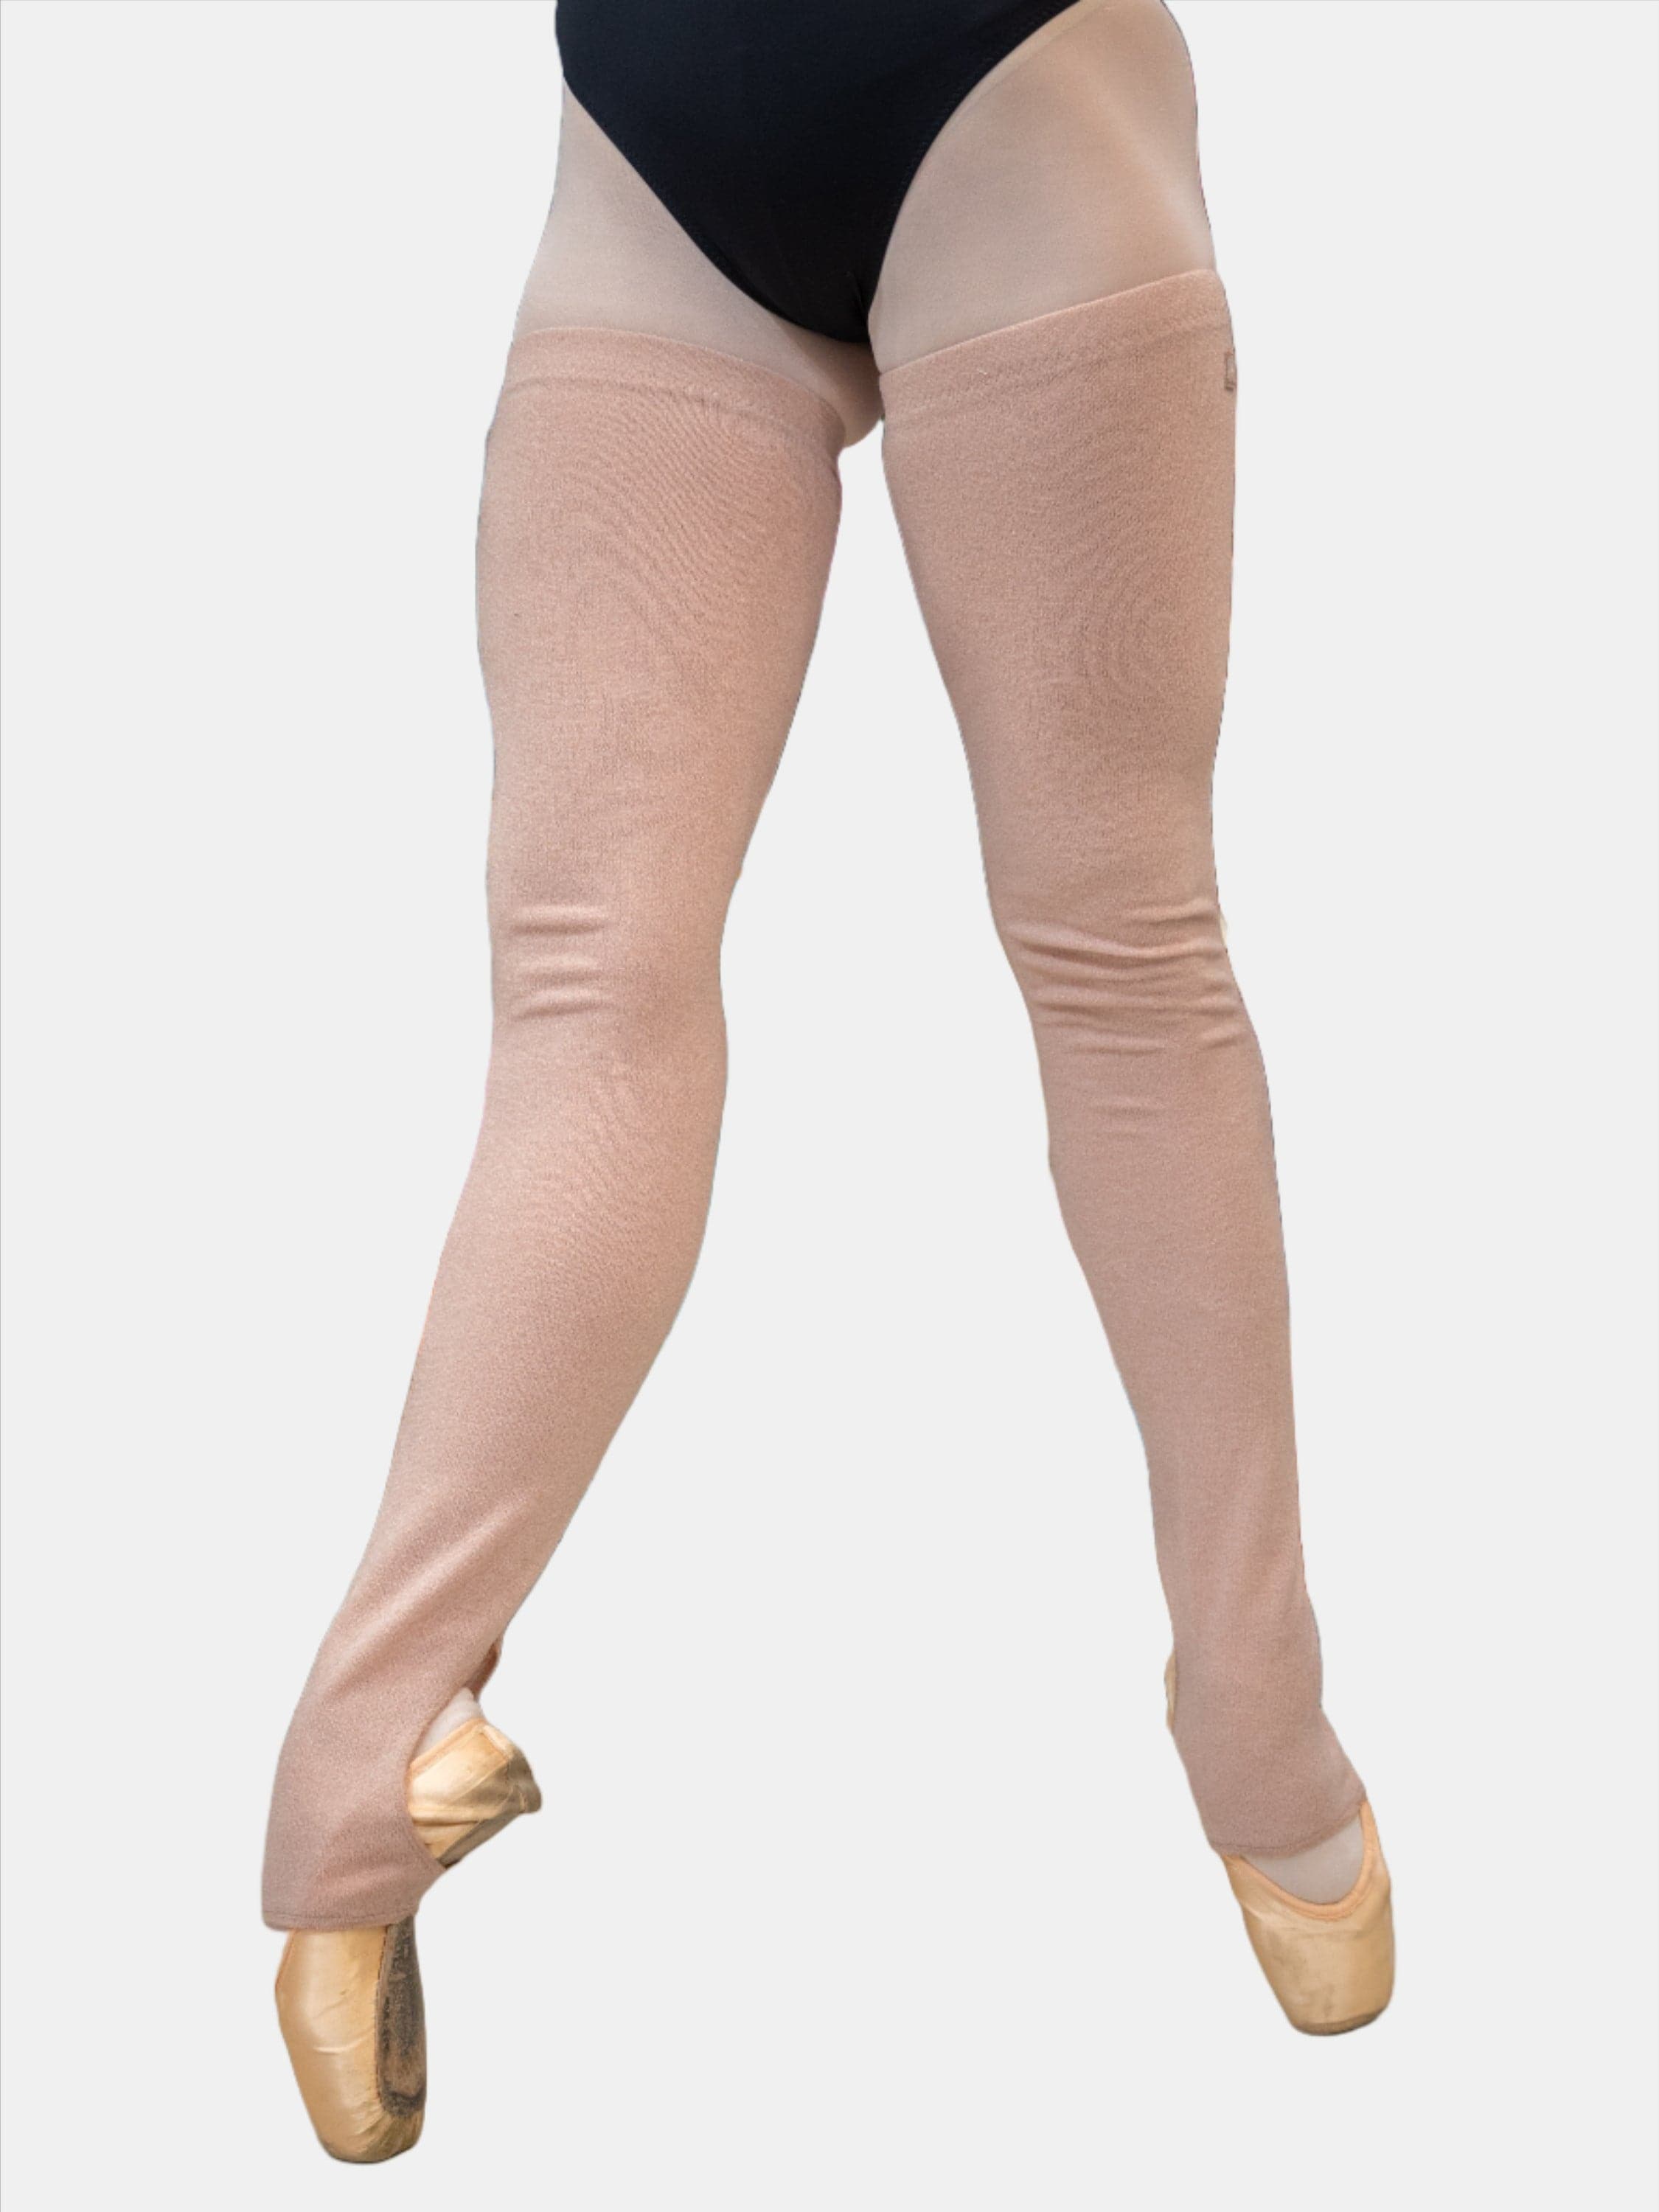 Legging With Leg Warmers Adult